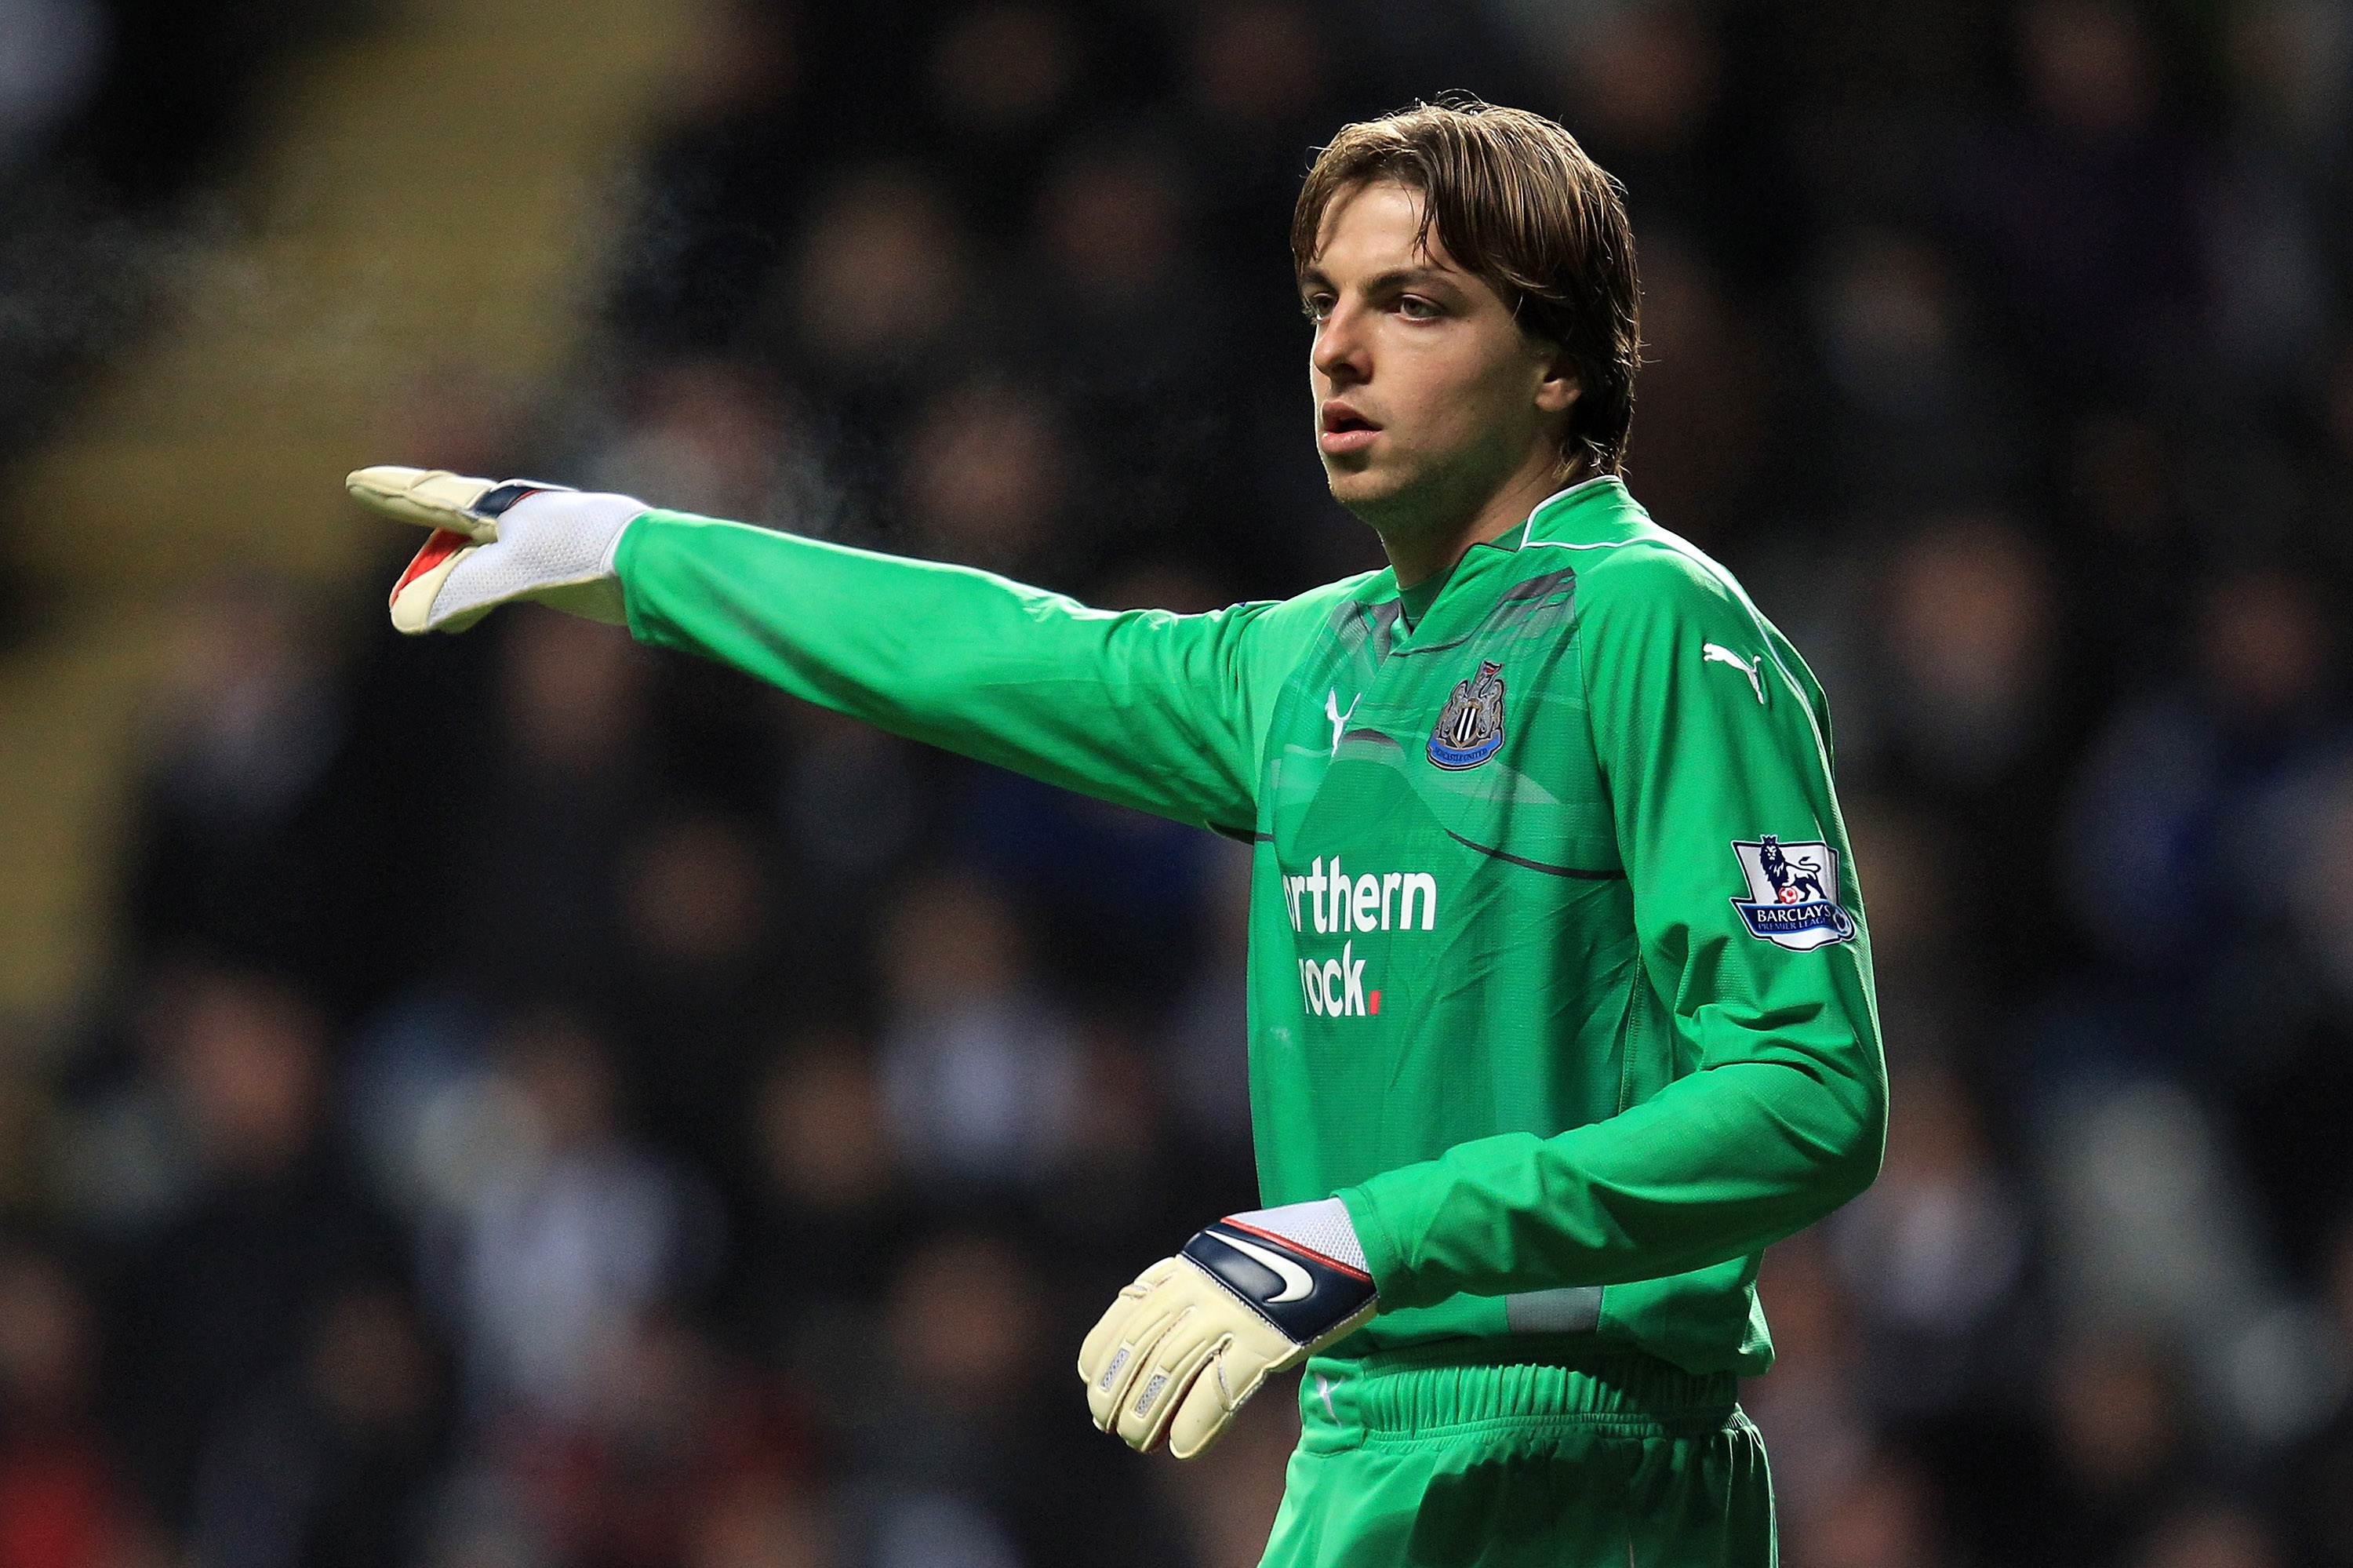 NEWCASTLE UPON TYNE, ENGLAND - DECEMBER 11:  Tim Krul of Newcastle United gestures during the Barclays Premier League match between Newcastle United and Liverpool at St James' Park on December 11, 2010 in Newcastle, England.  (Photo by Mark Thompson/Getty